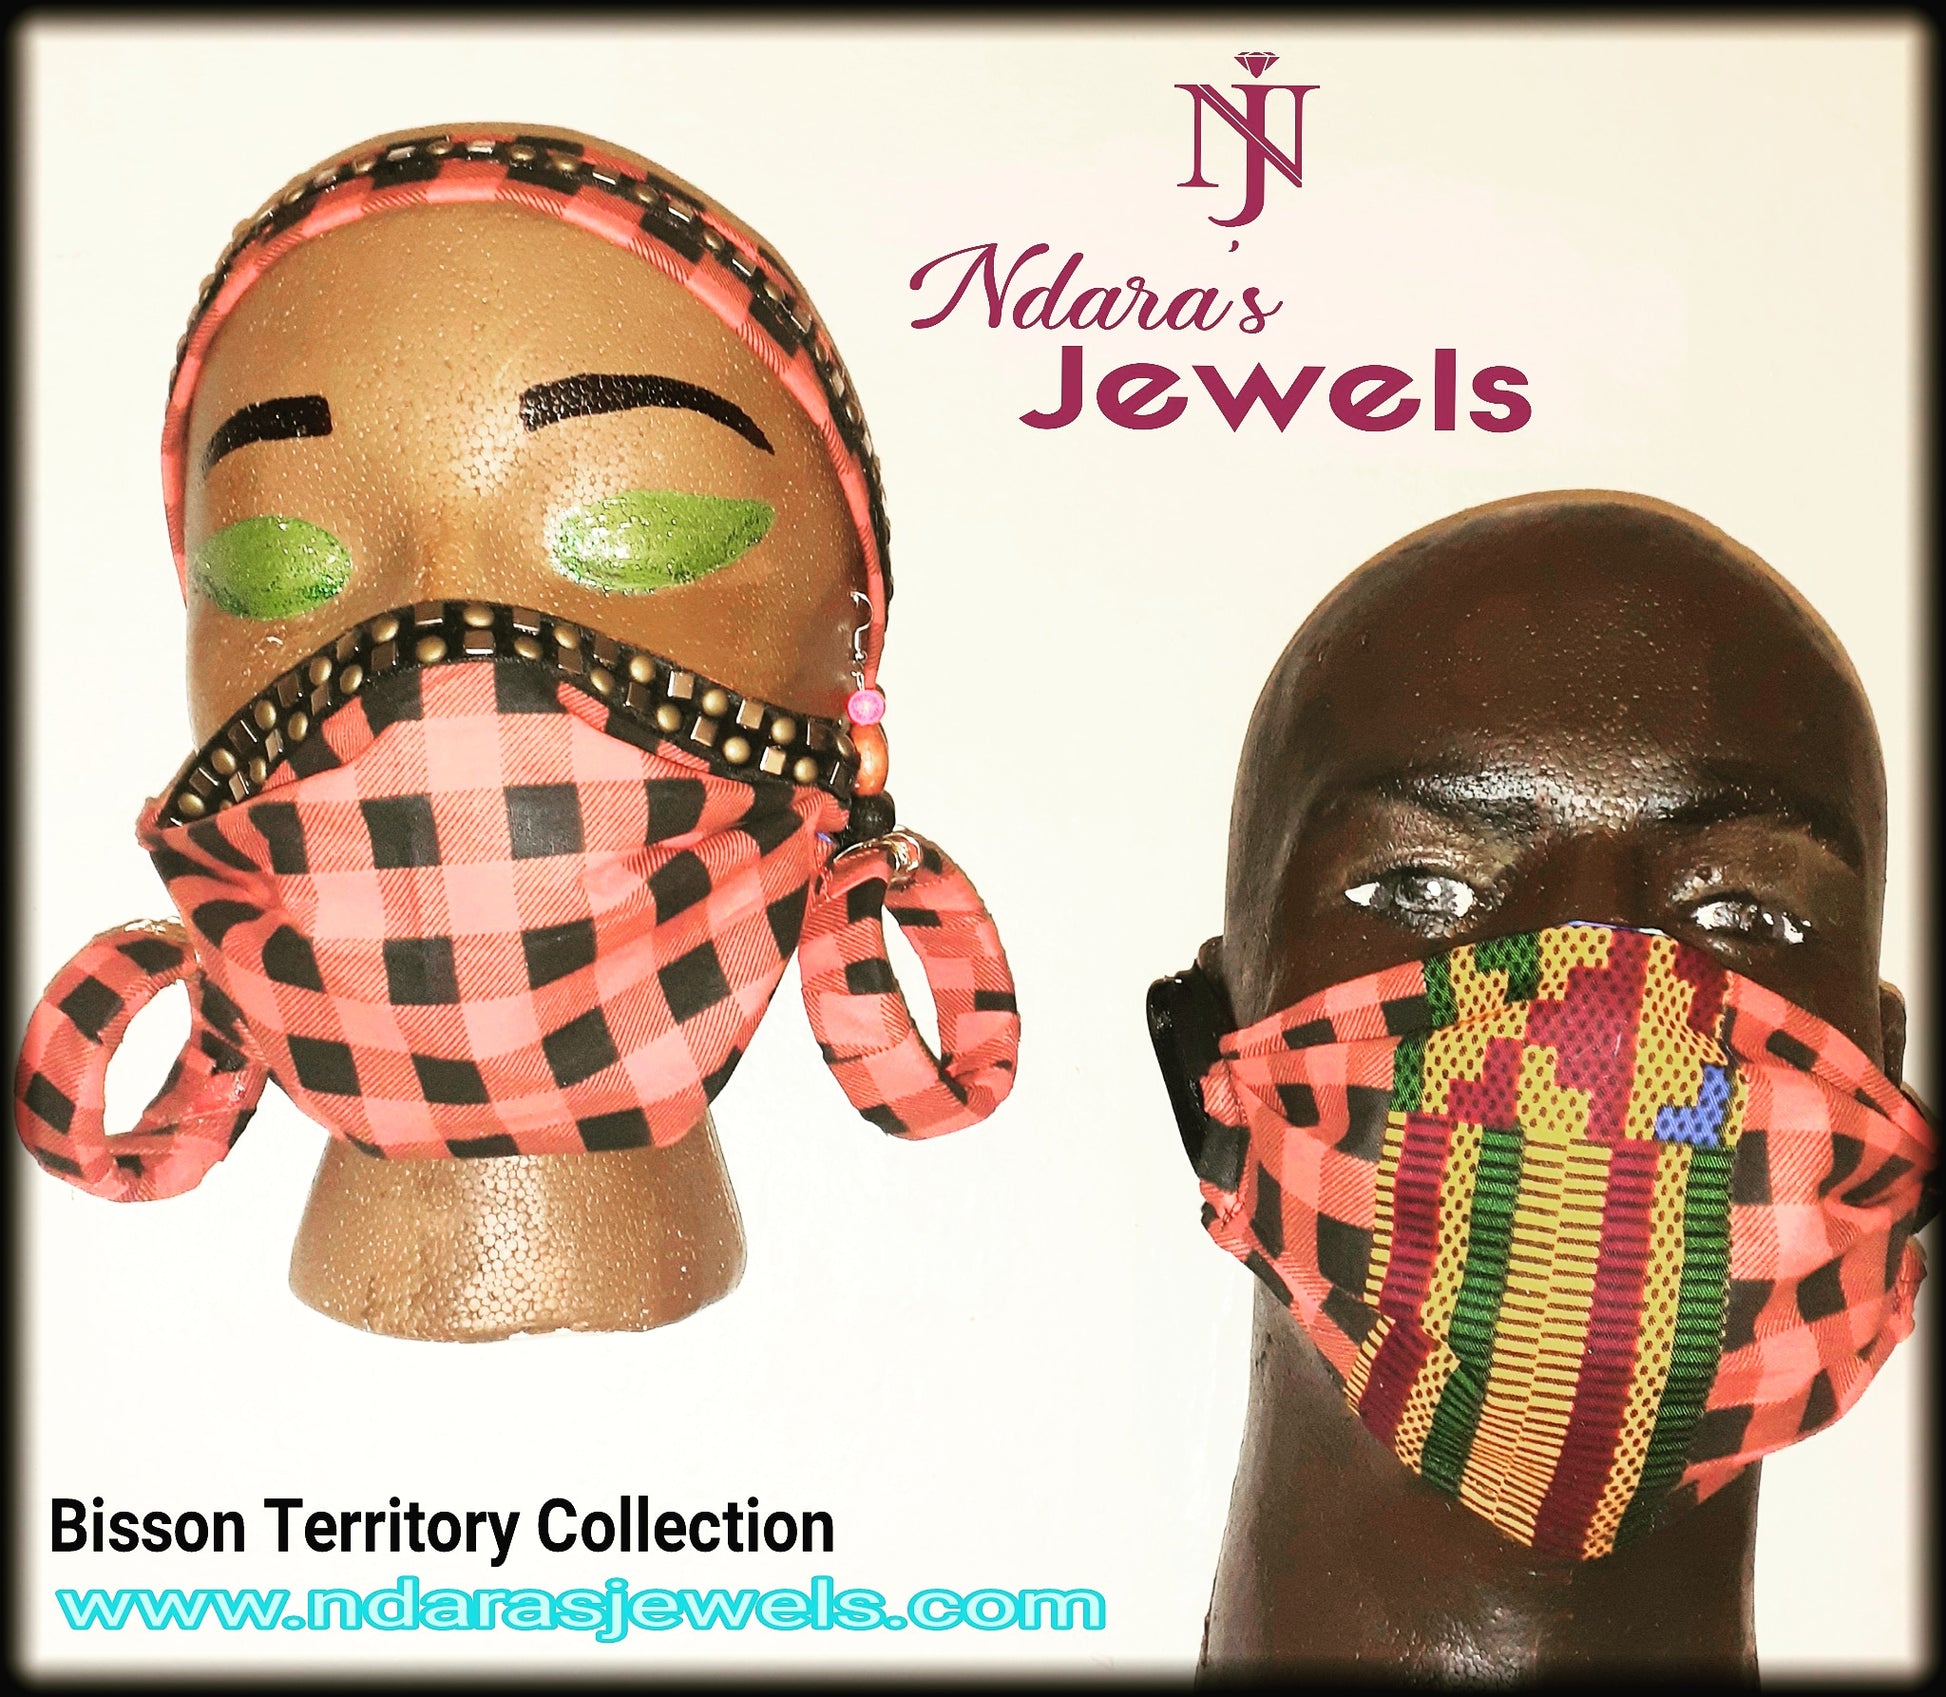 Bisson Territory Collection-Ndara's Jewels